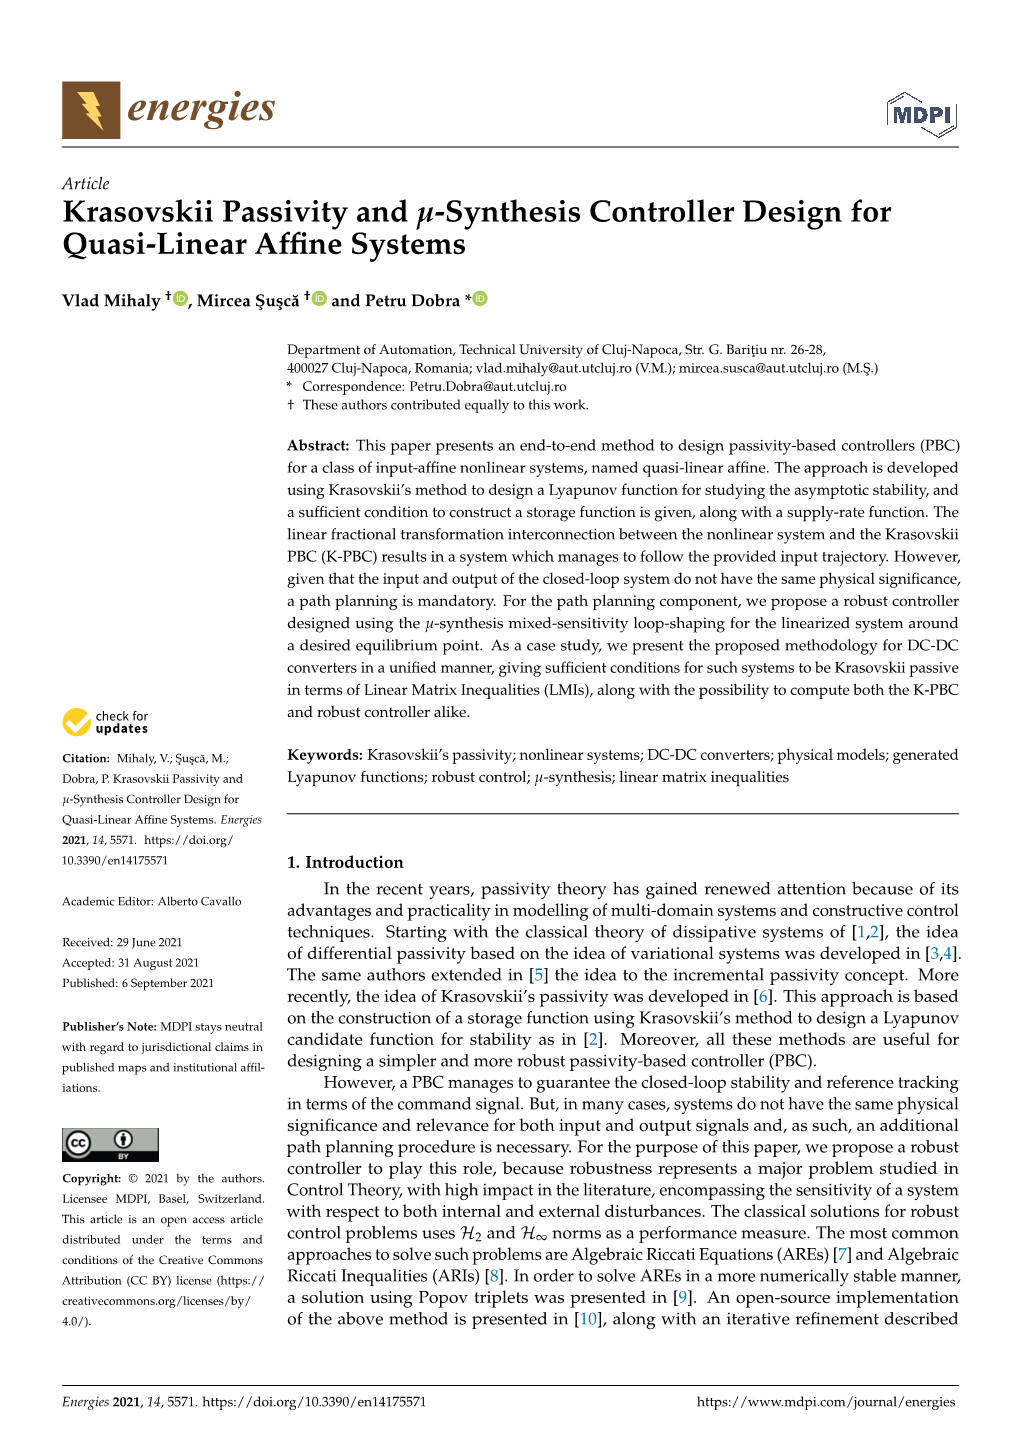 Krasovskii Passivity and -Synthesis Controller Design for Quasi-Linear